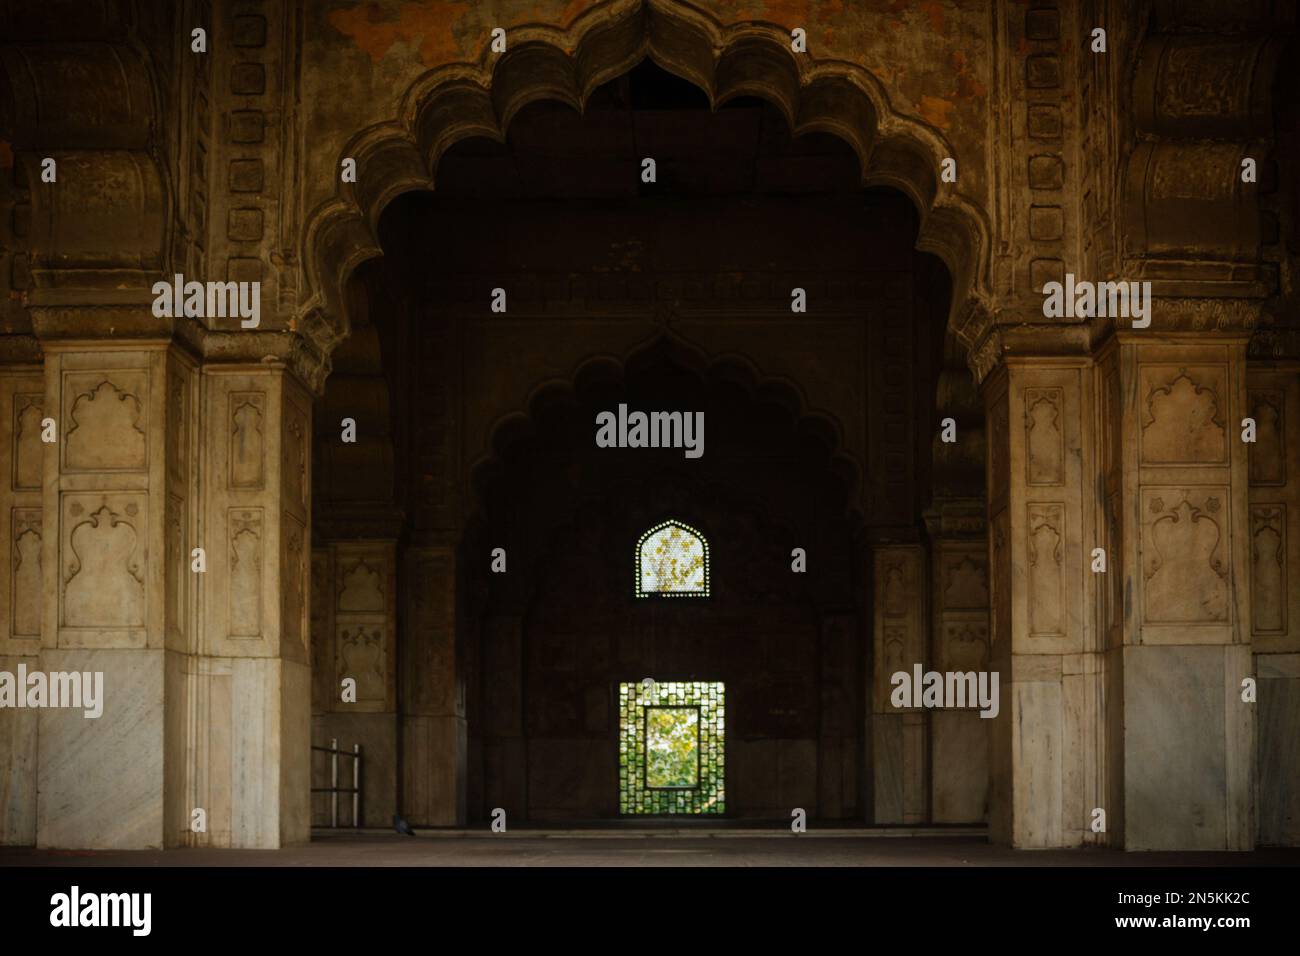 The Mumtaz Mahal of the Red Fort in Delhi, India. Stock Photo